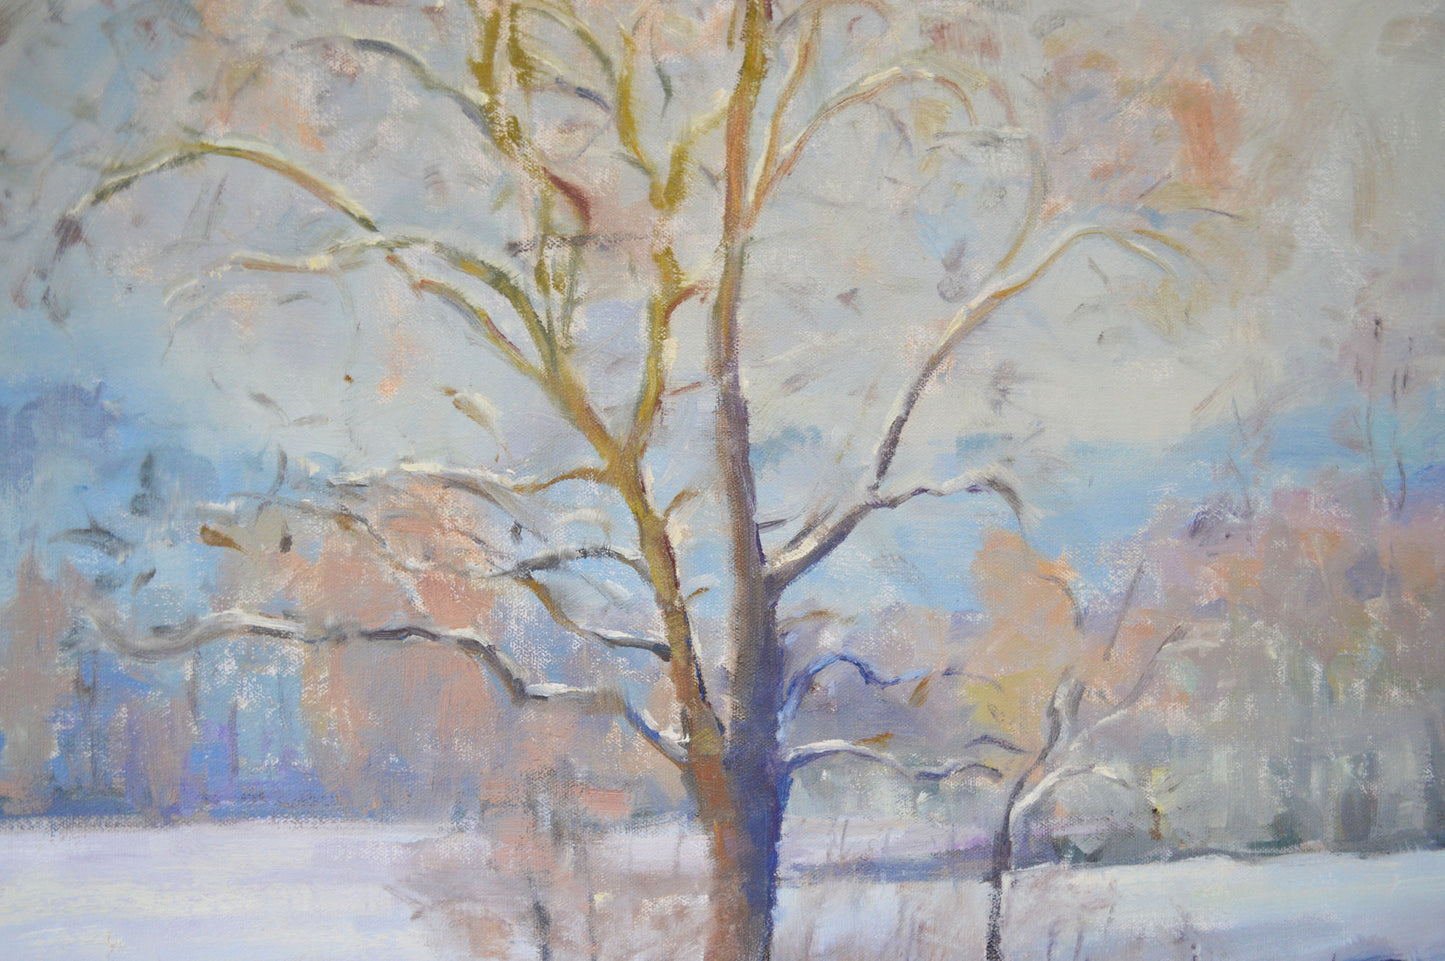 "Spring Snowfall" 24x36 original oil painting on stretched canvas